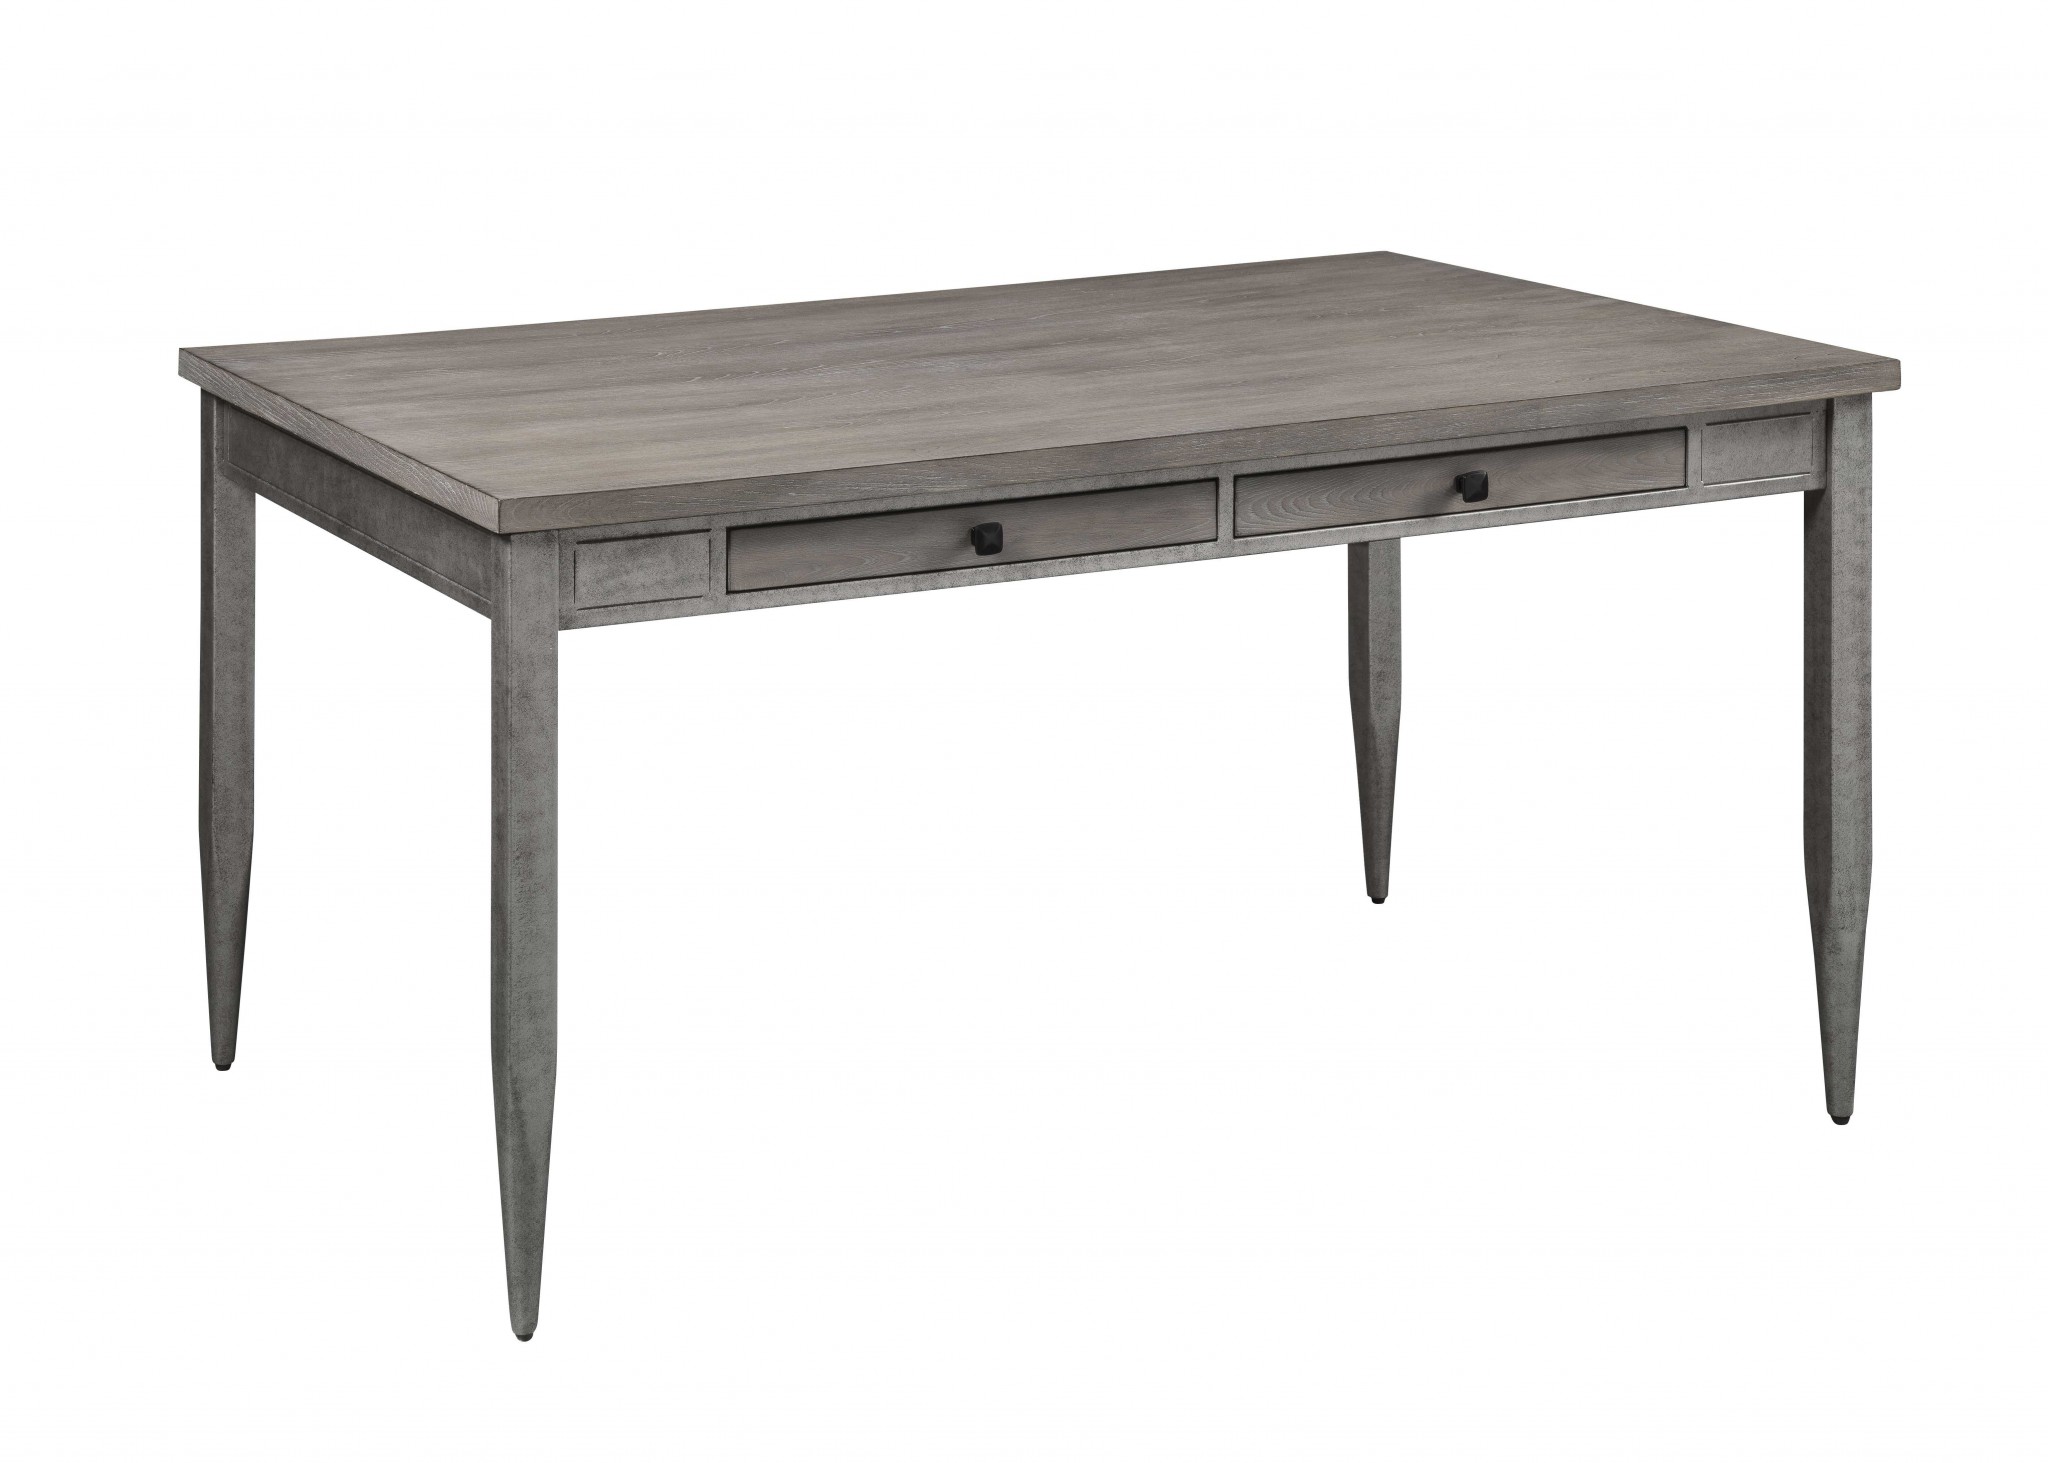 60" X 36" X 30" Gray Oak And Antique Gray Dining Table